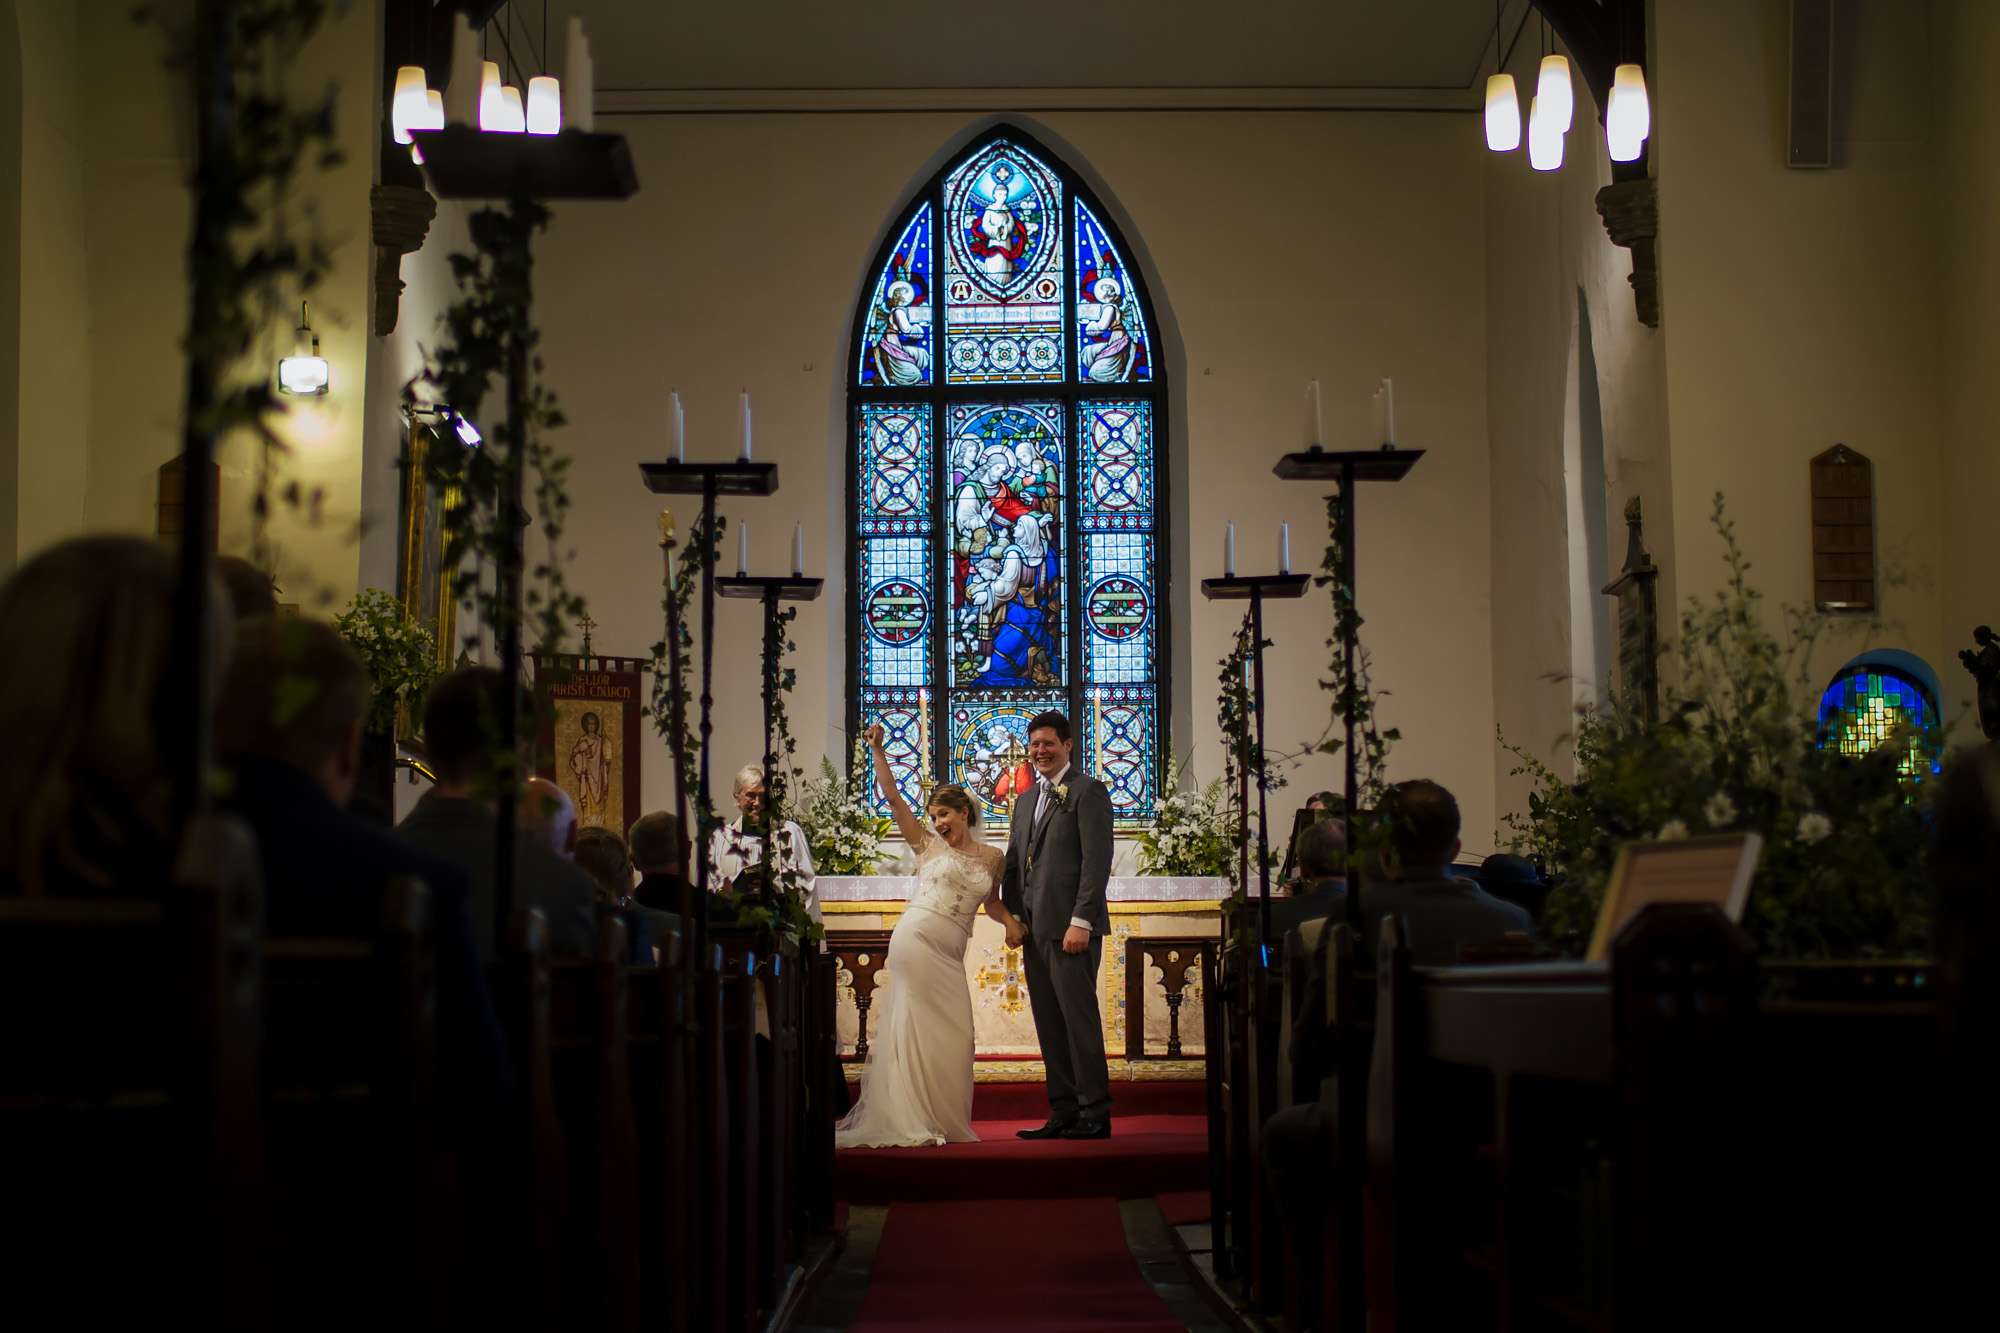 Bride celebrating by punching the air at a church wedding ceremony